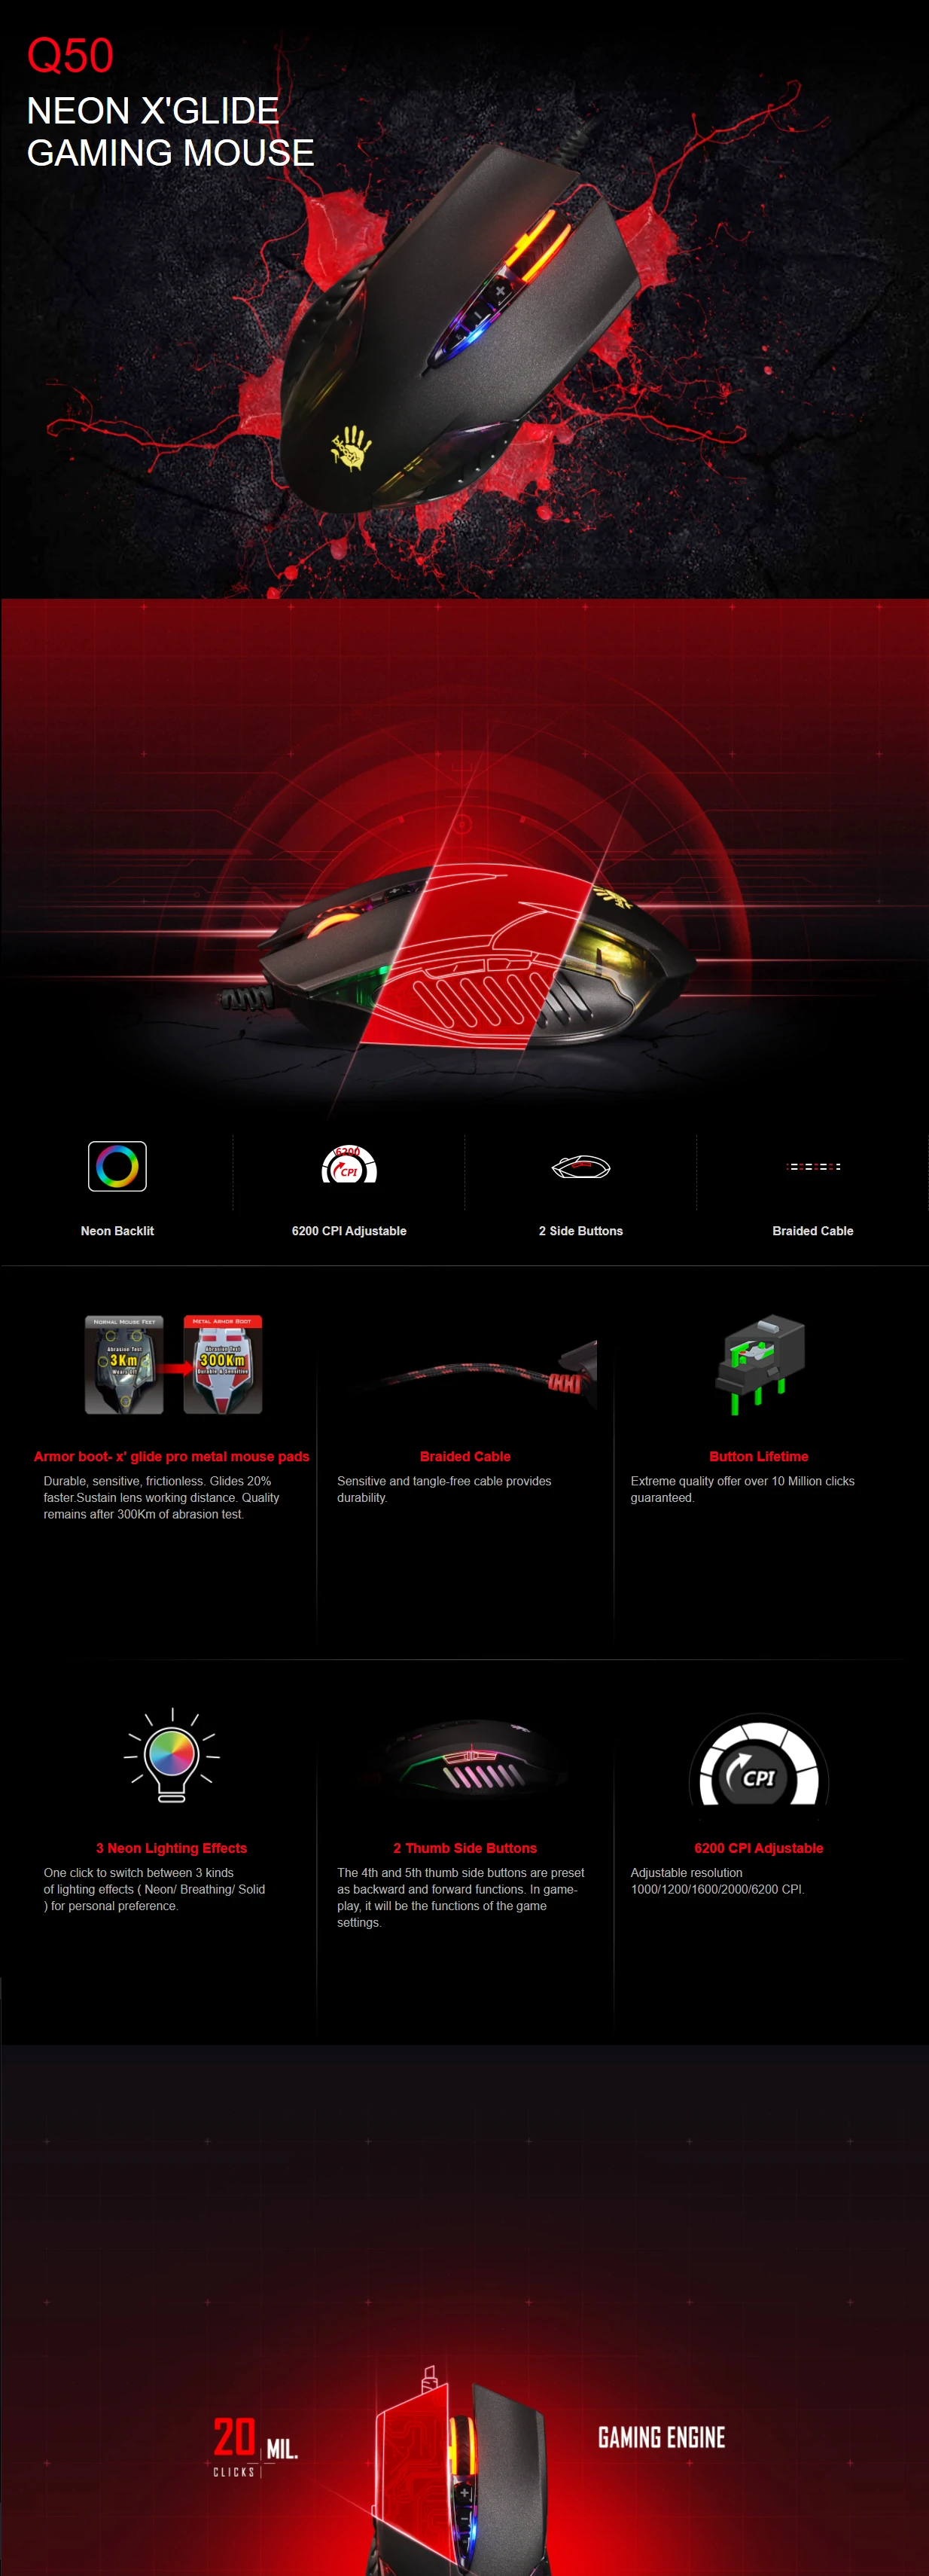 Overview - Bloody - Q50 Neon X'Glide Gaming Mouse